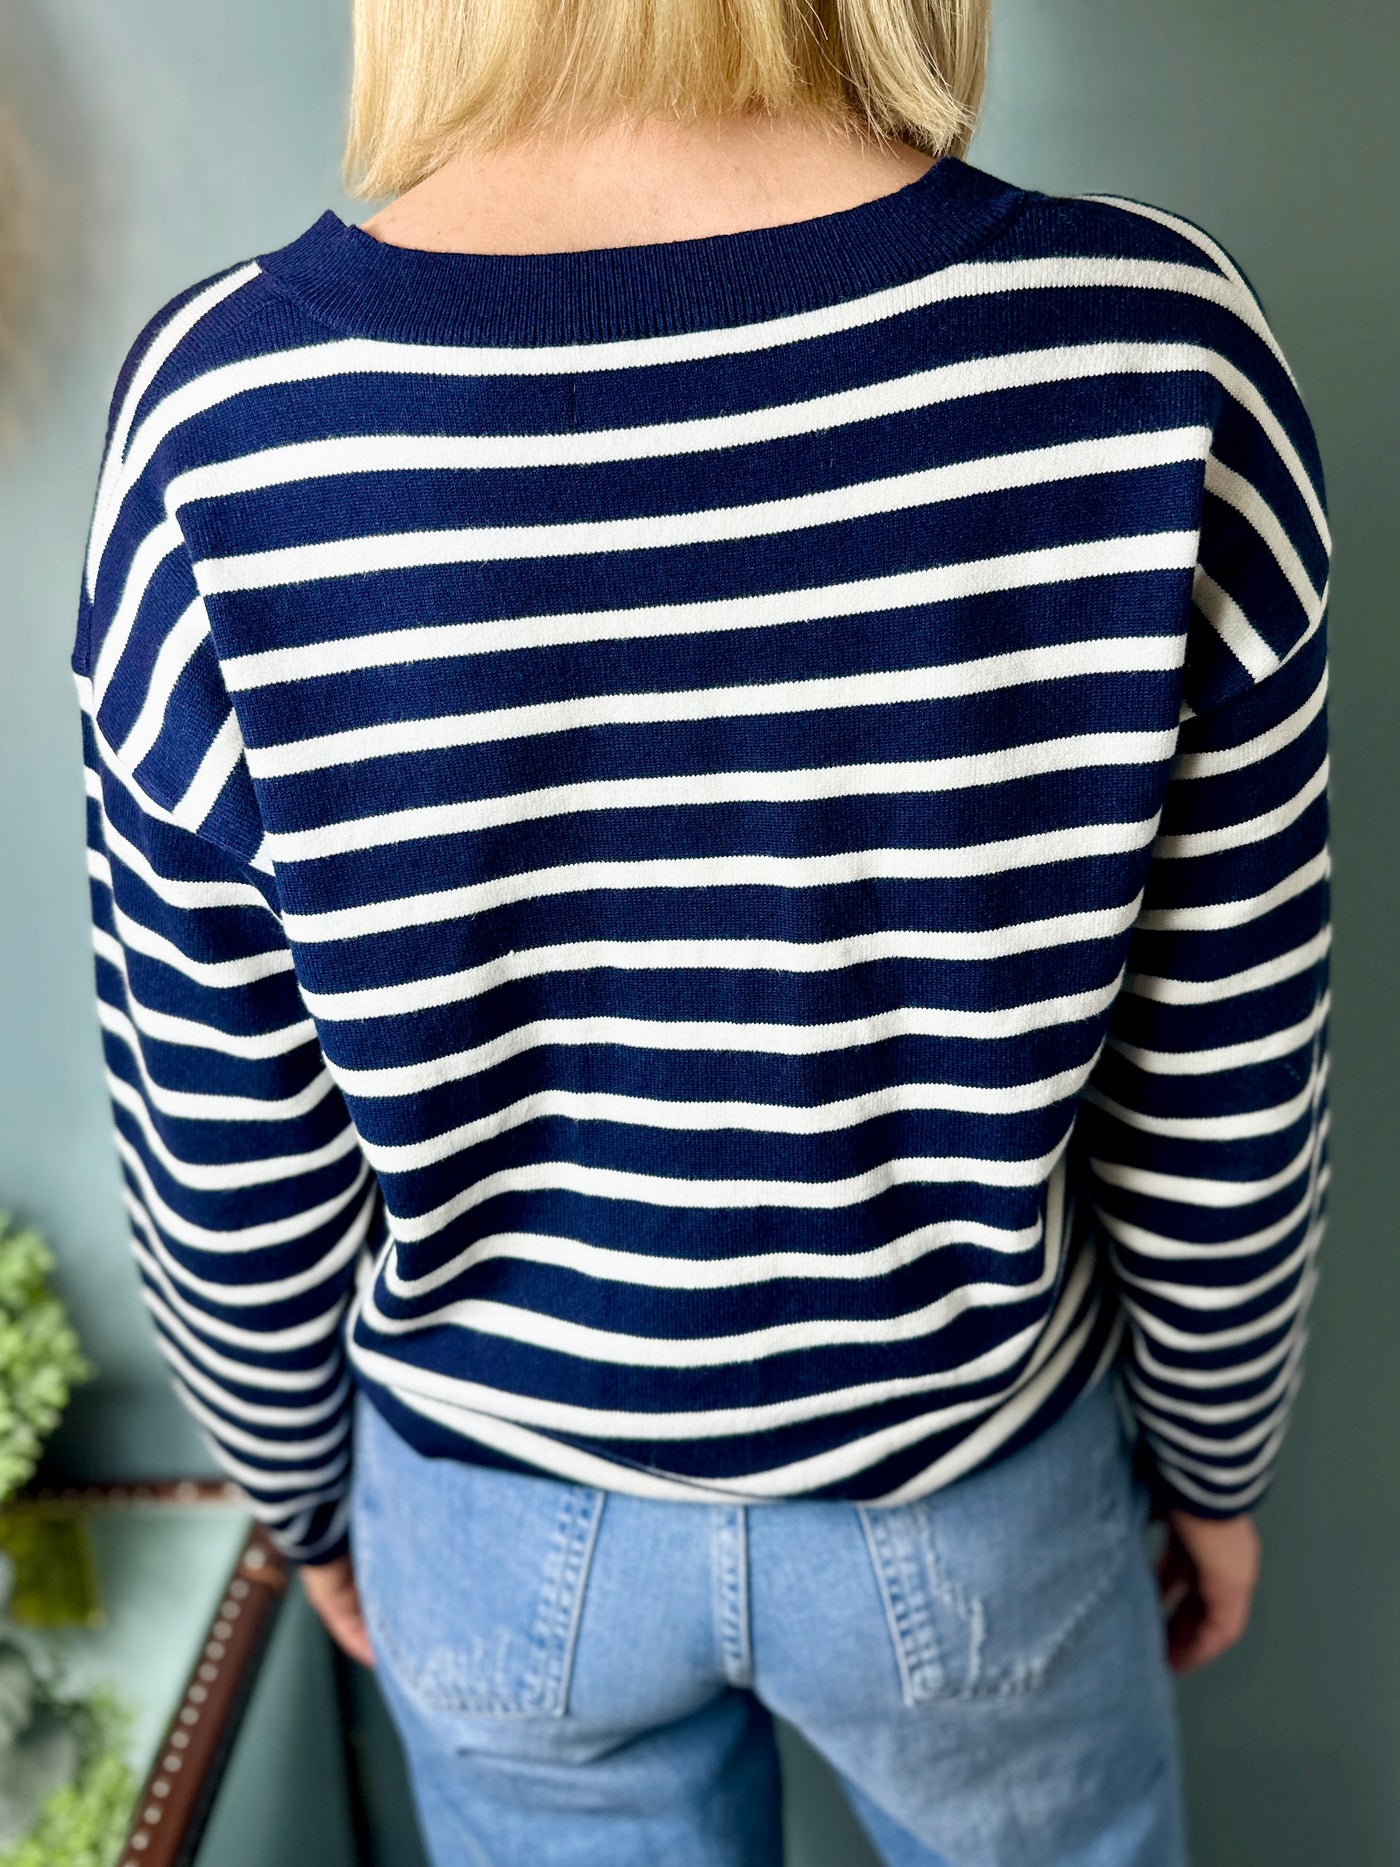 Chloe Jumper in Navy and White